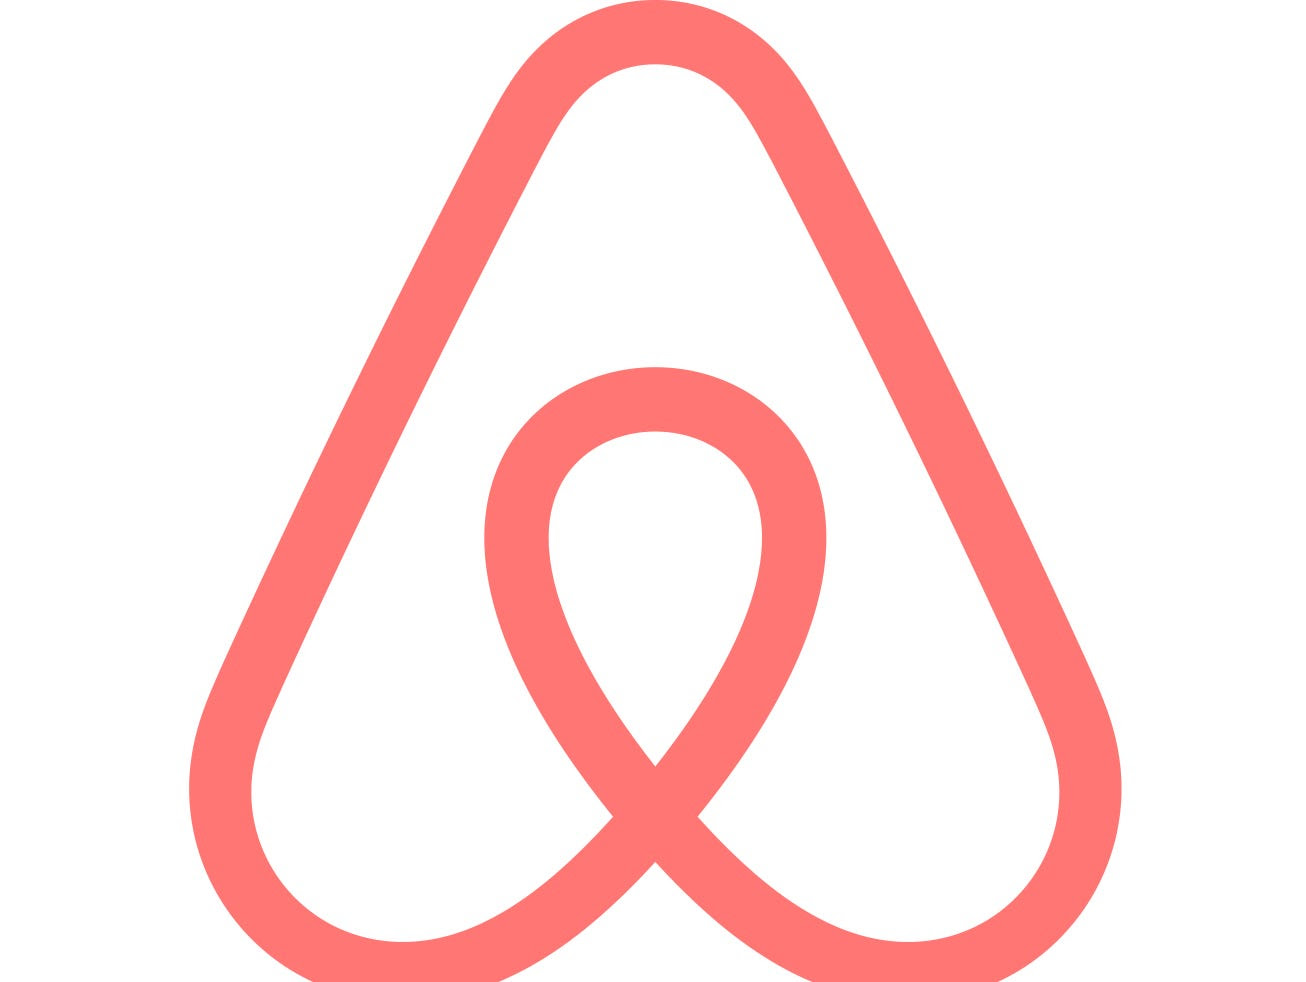 Airbnb has been facing mounting pressure in the Big Apple.